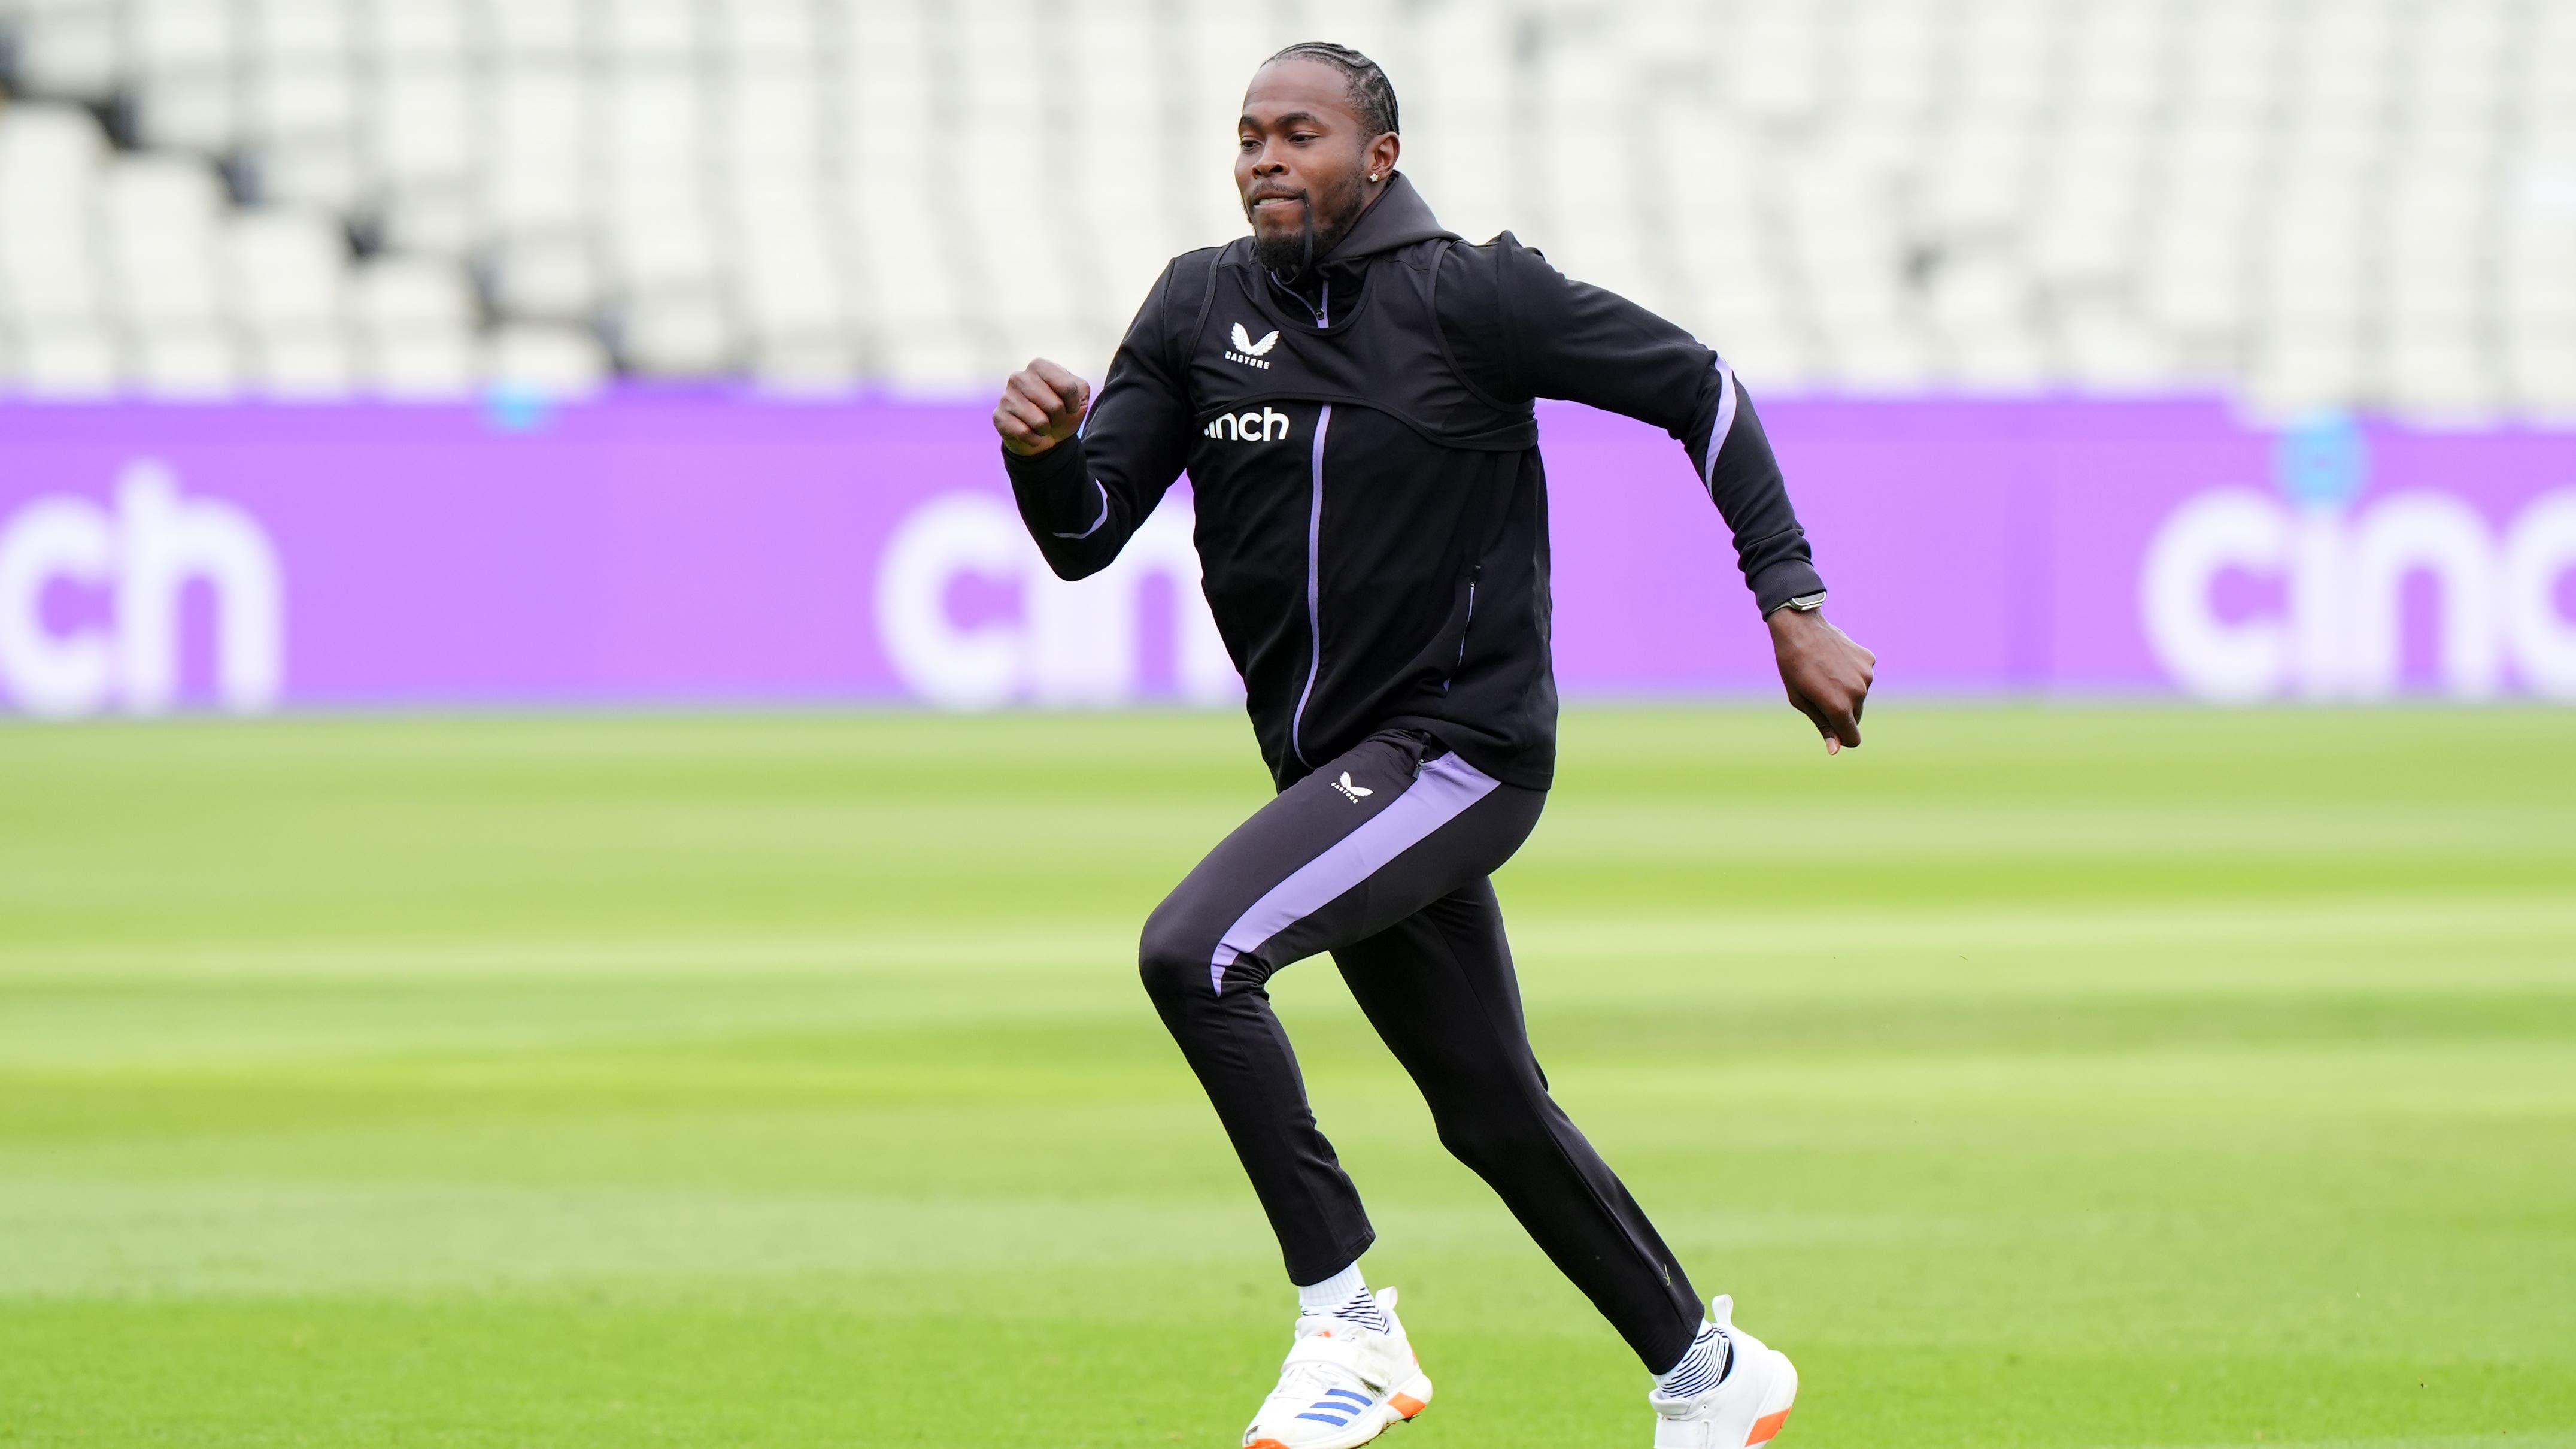 Jofra Archer to make England return in Saturday’s T20 clash with Pakistan